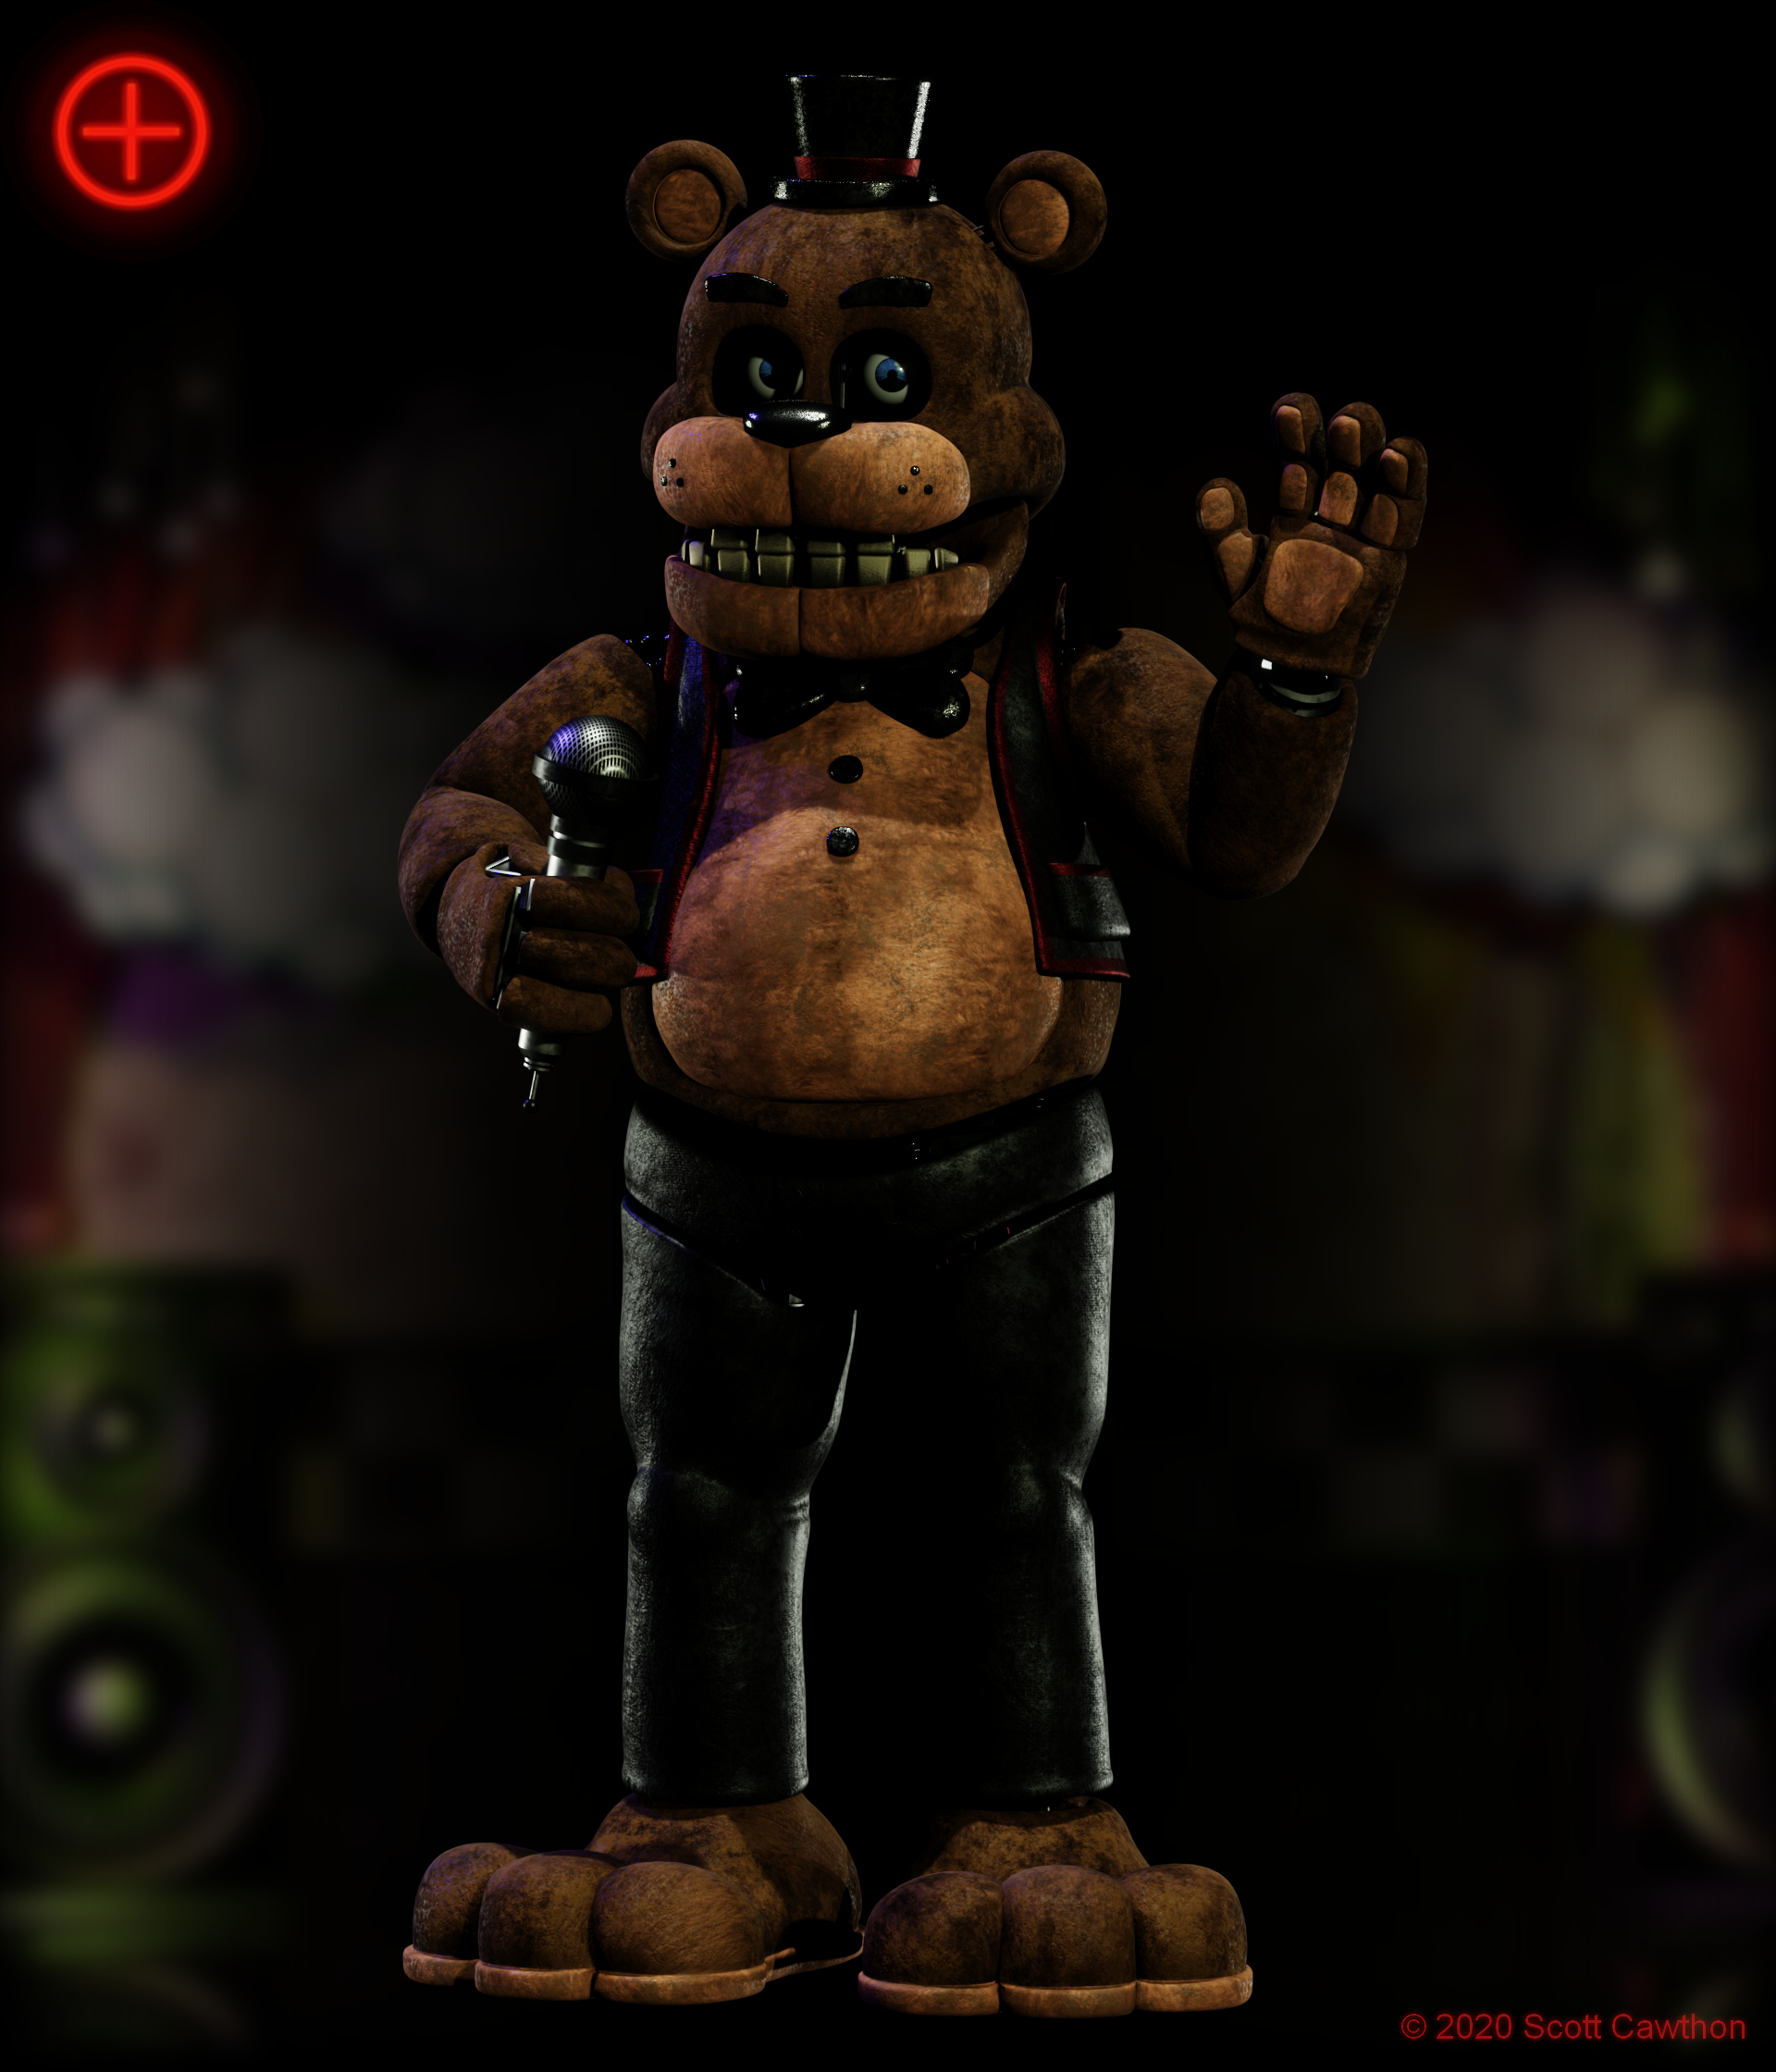 Game Area, Five Nights at Freddy's Wiki